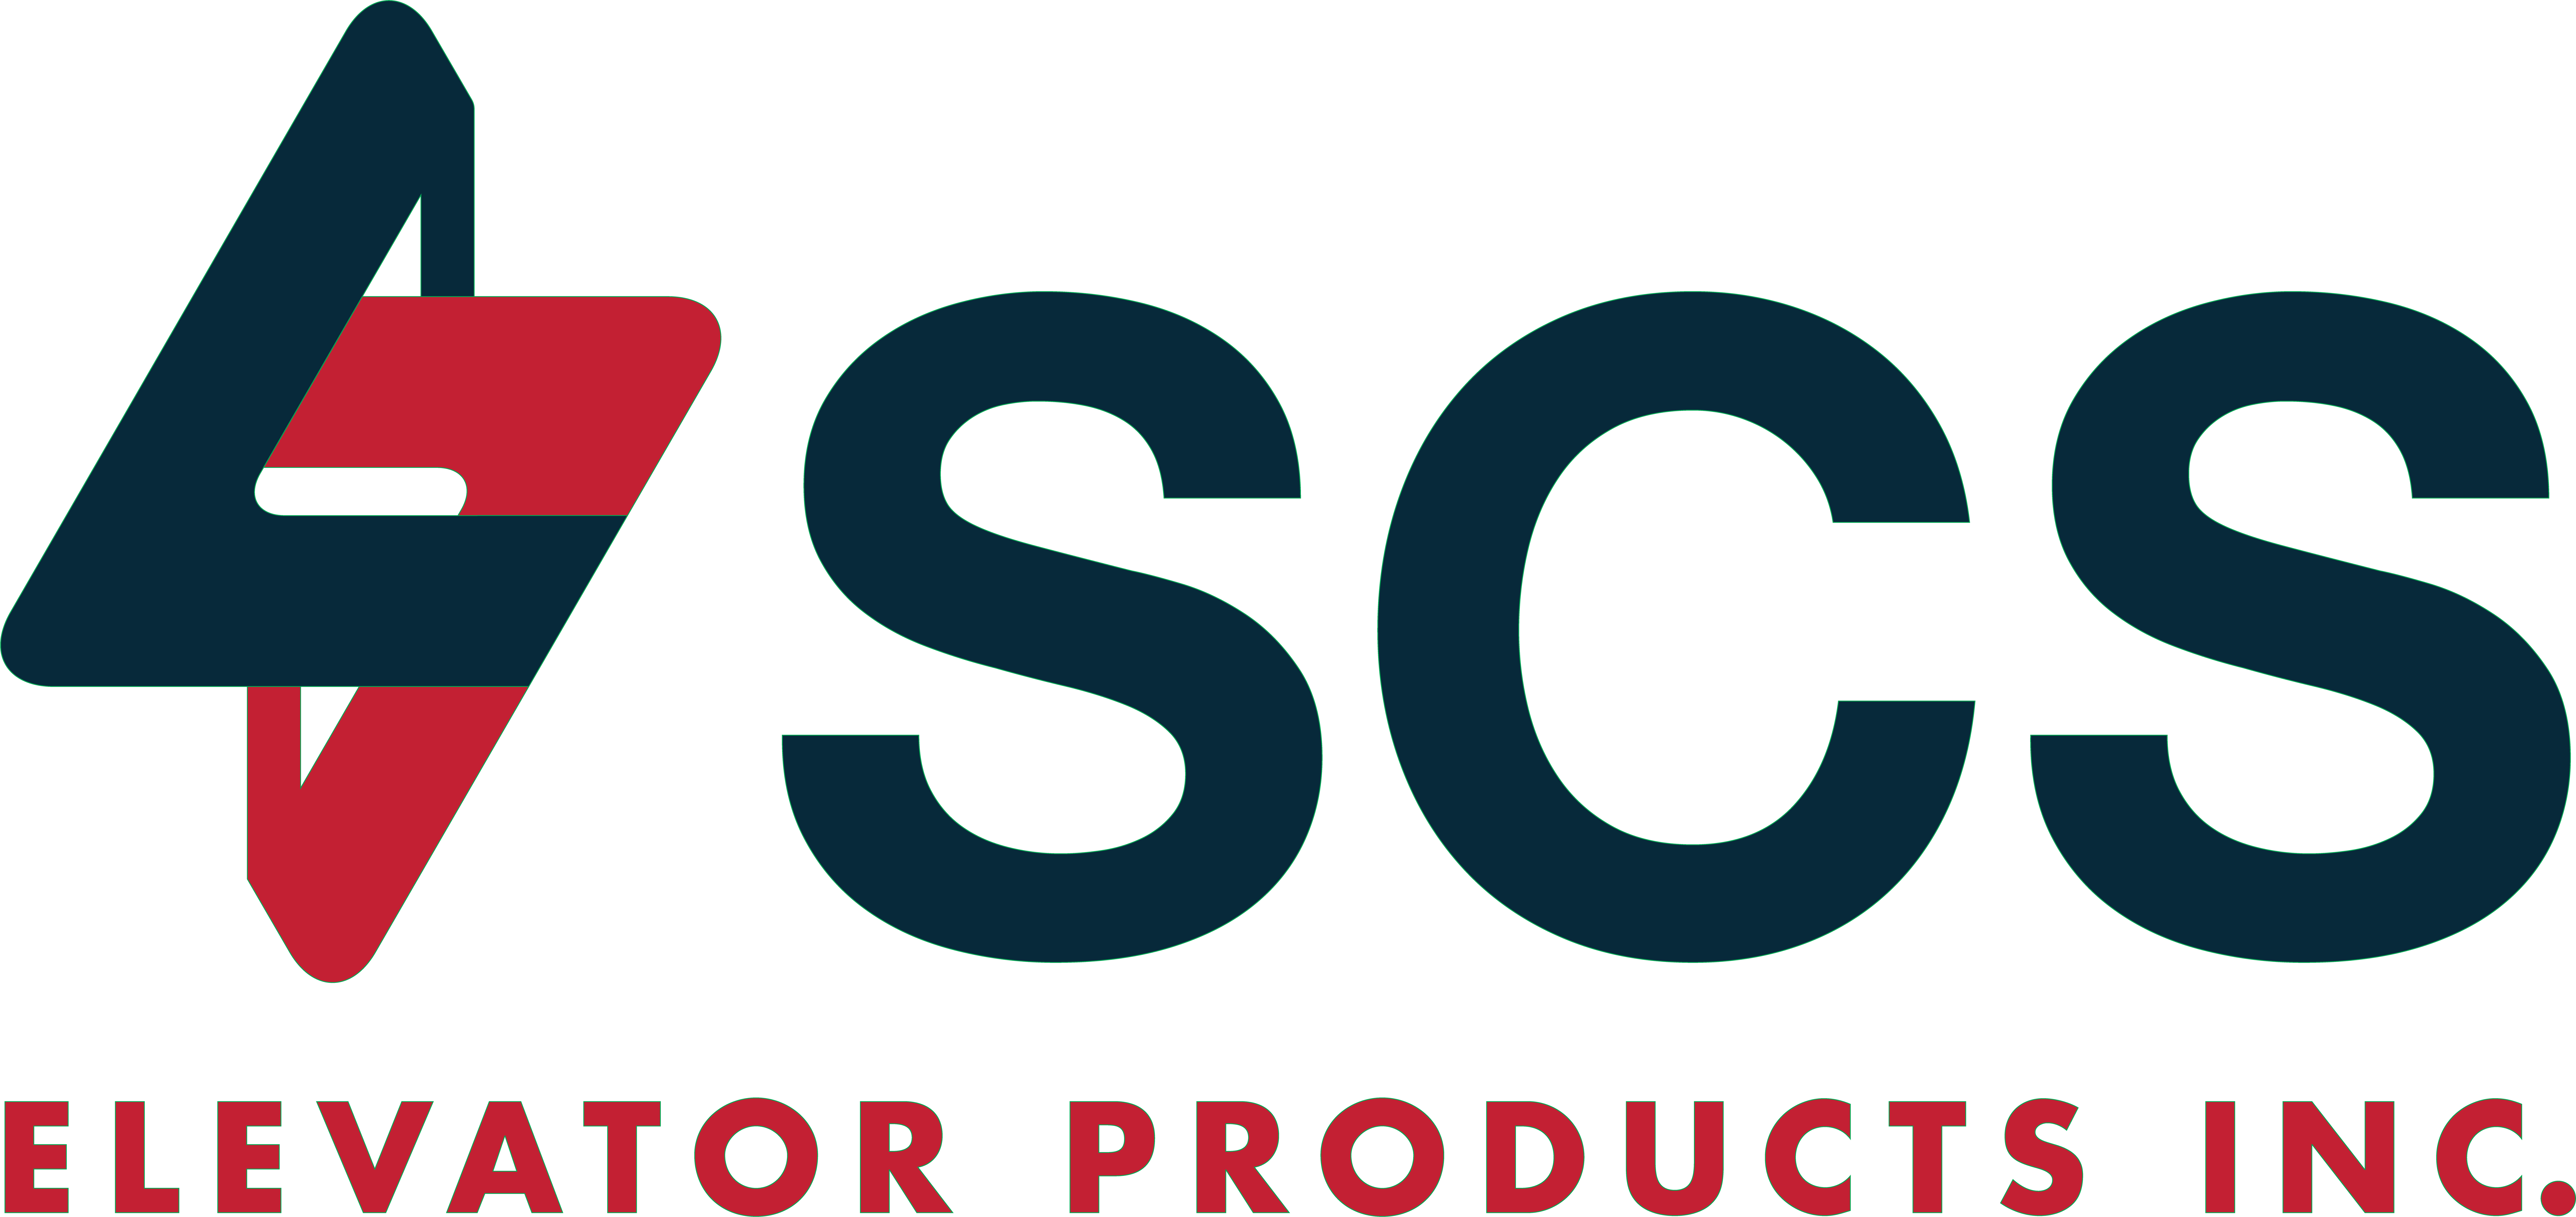 SCS WALL LOGO